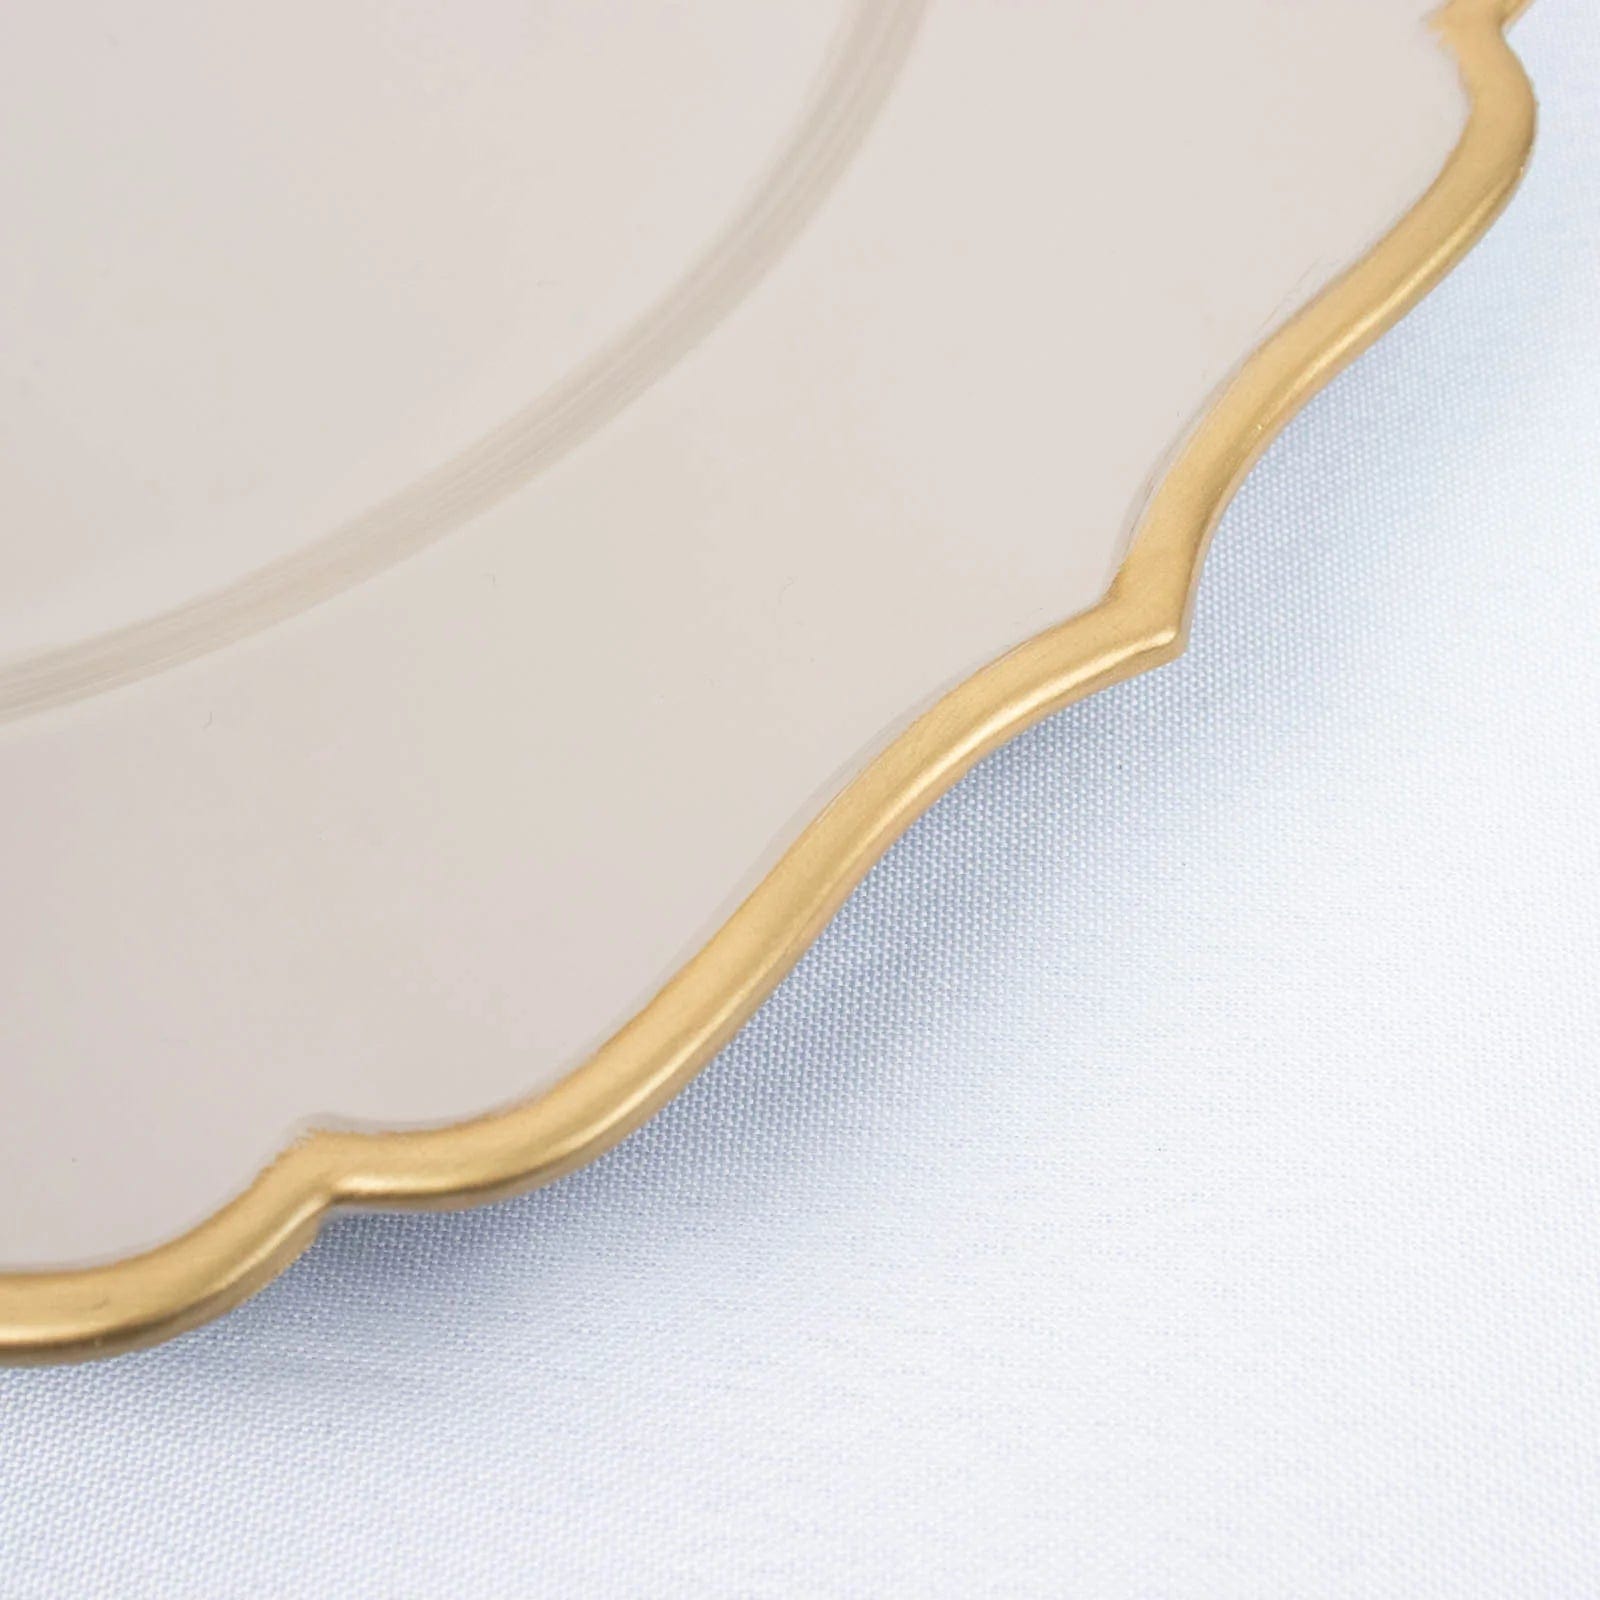 6 Metallic 13 in Round Acrylic Charger Plates with Scalloped Trim